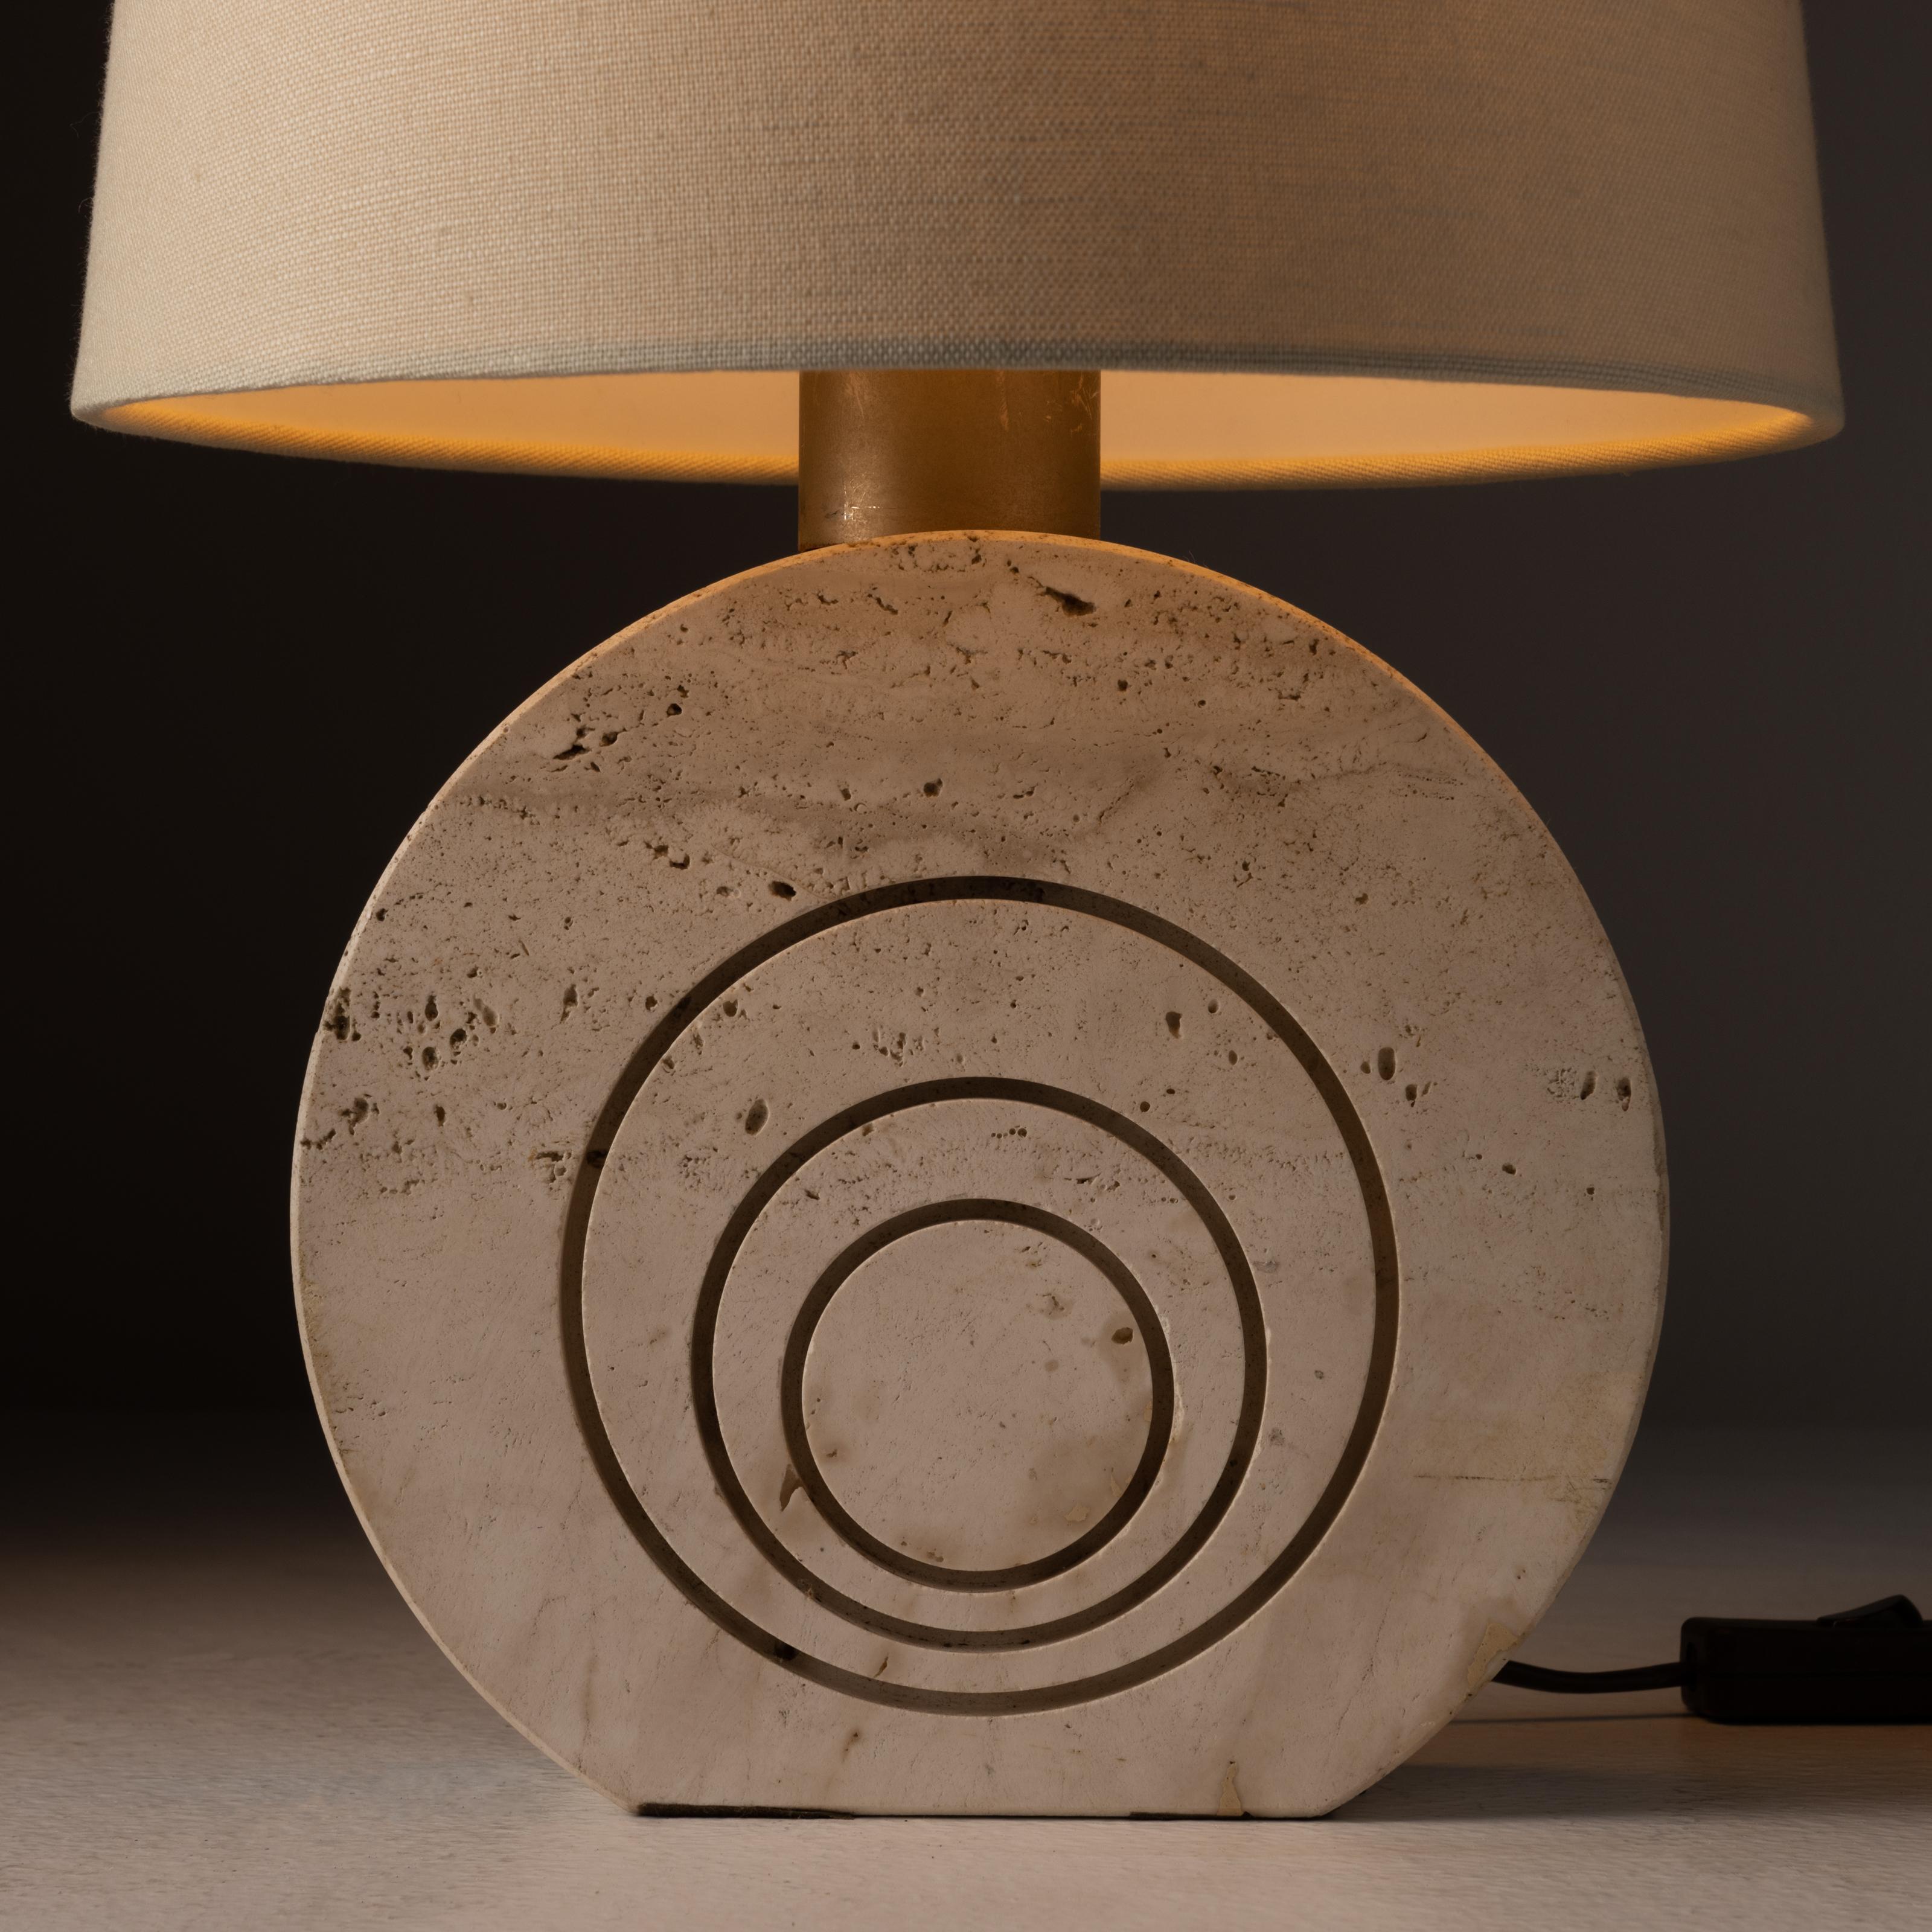 Travertine table lamp by Fratelli Mannelli. Designed and manufactured in Italy, circa 1970. Simple travertine table lamp with etched set of three circles on the face of the lamp base. The lamp holds one E27 bulb socket, adapted for the US. We